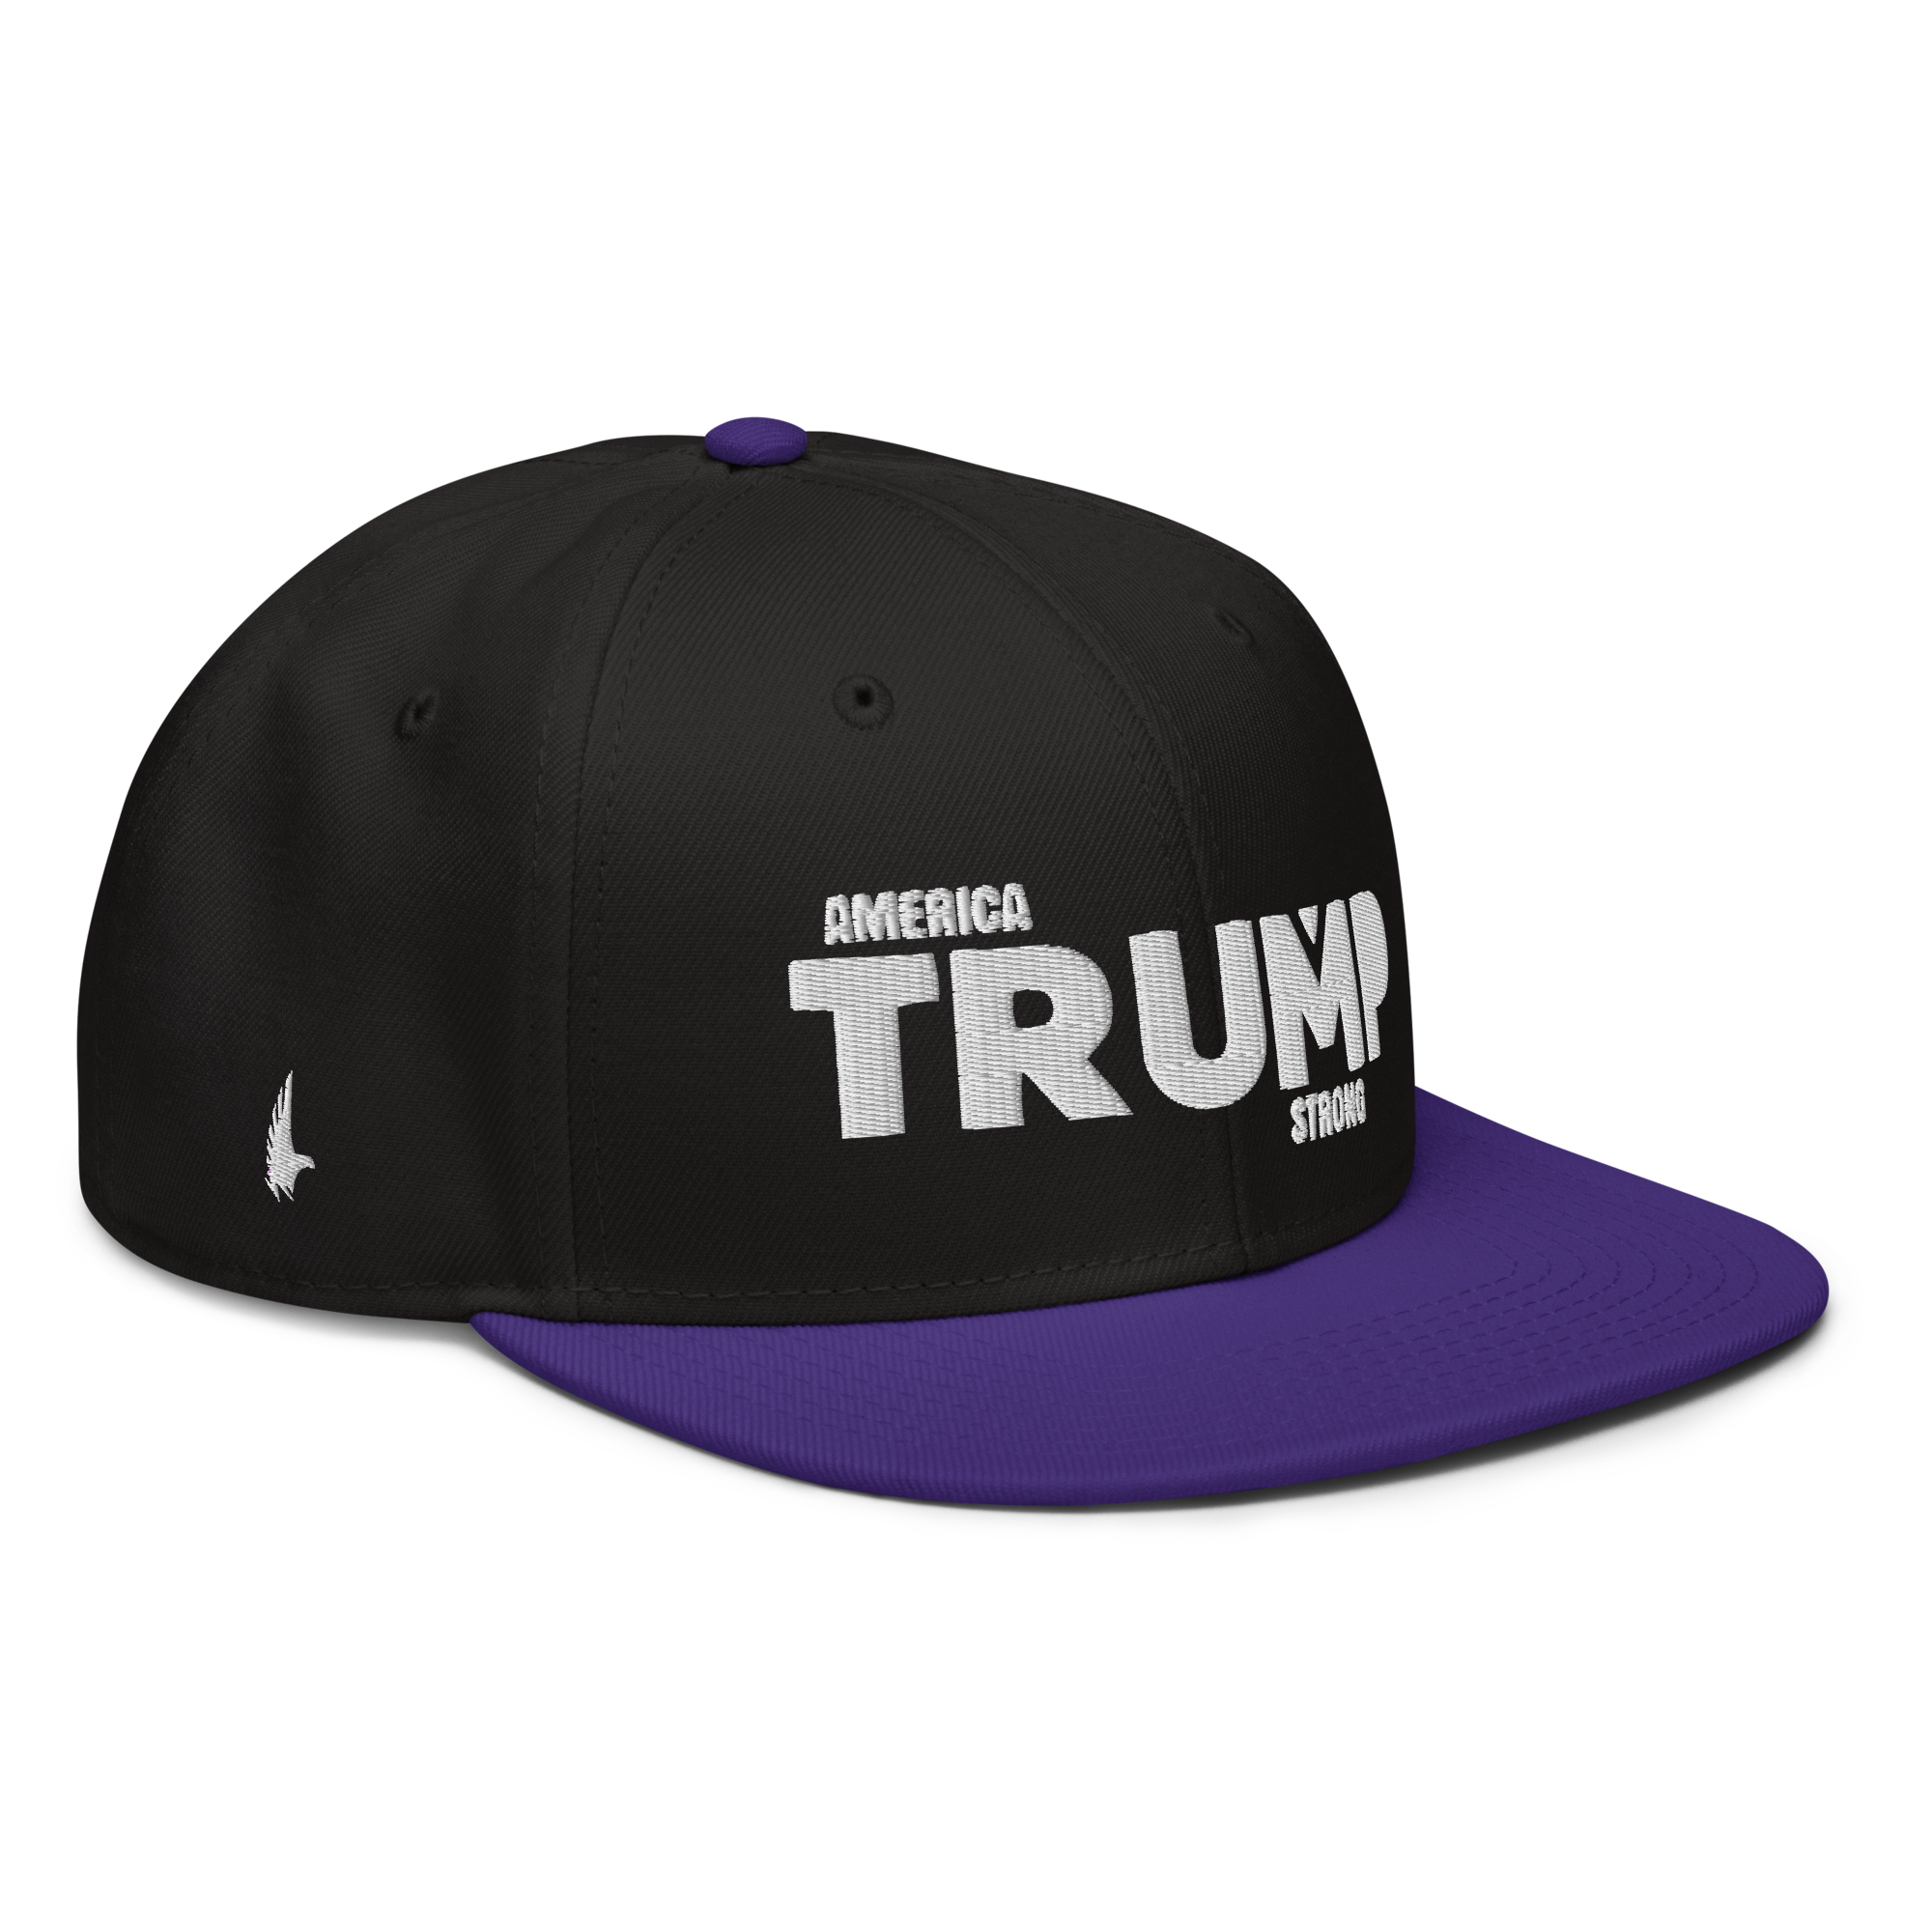 Loyalty Vibes America Trump Strong Snapback Hat Black White Purple One size - Loyalty Vibes